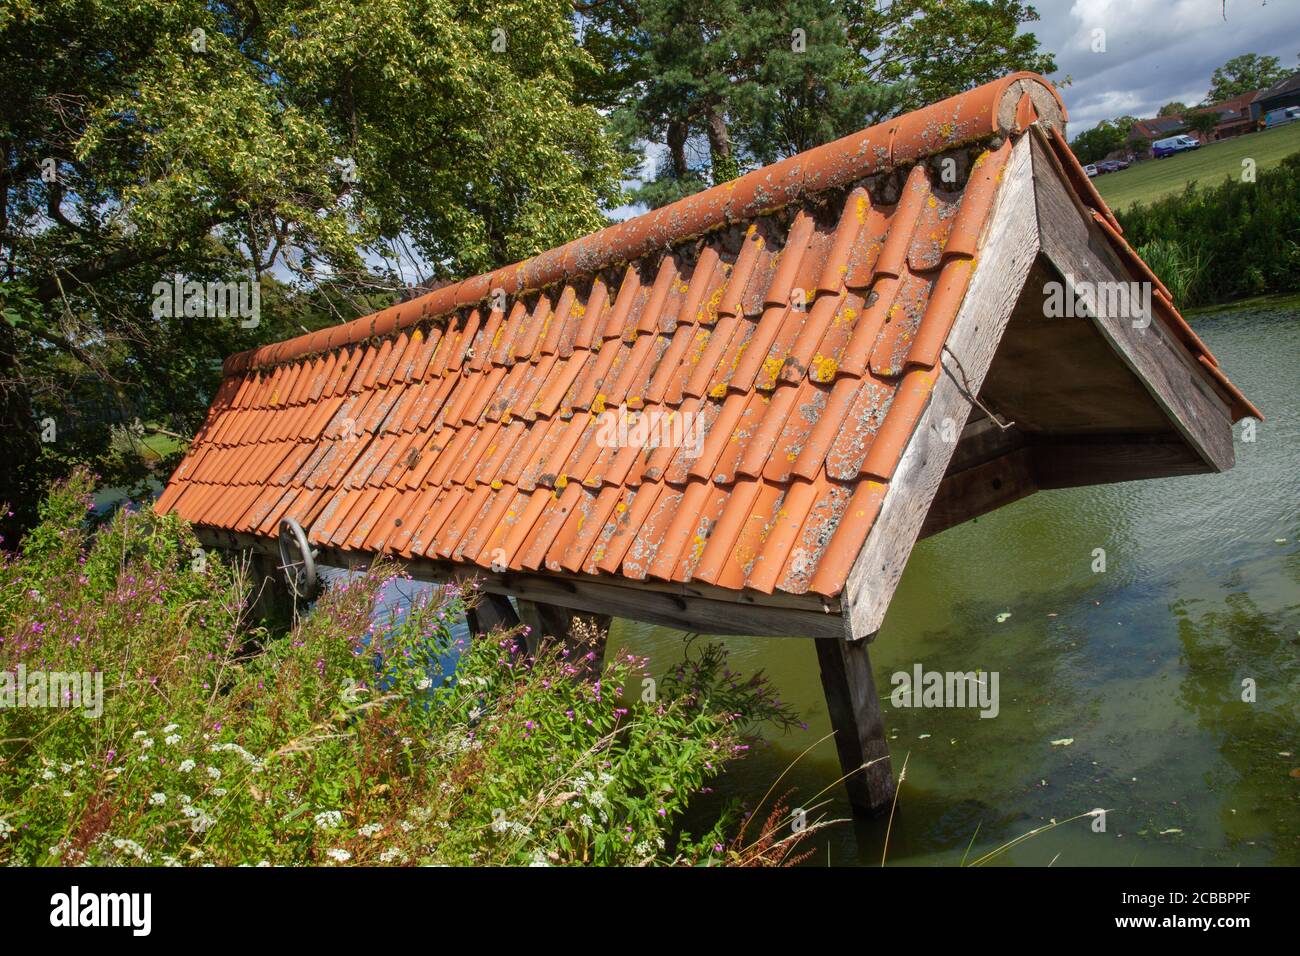 Old wooden, boat house, clay tiled roof, fishpond in the grounds